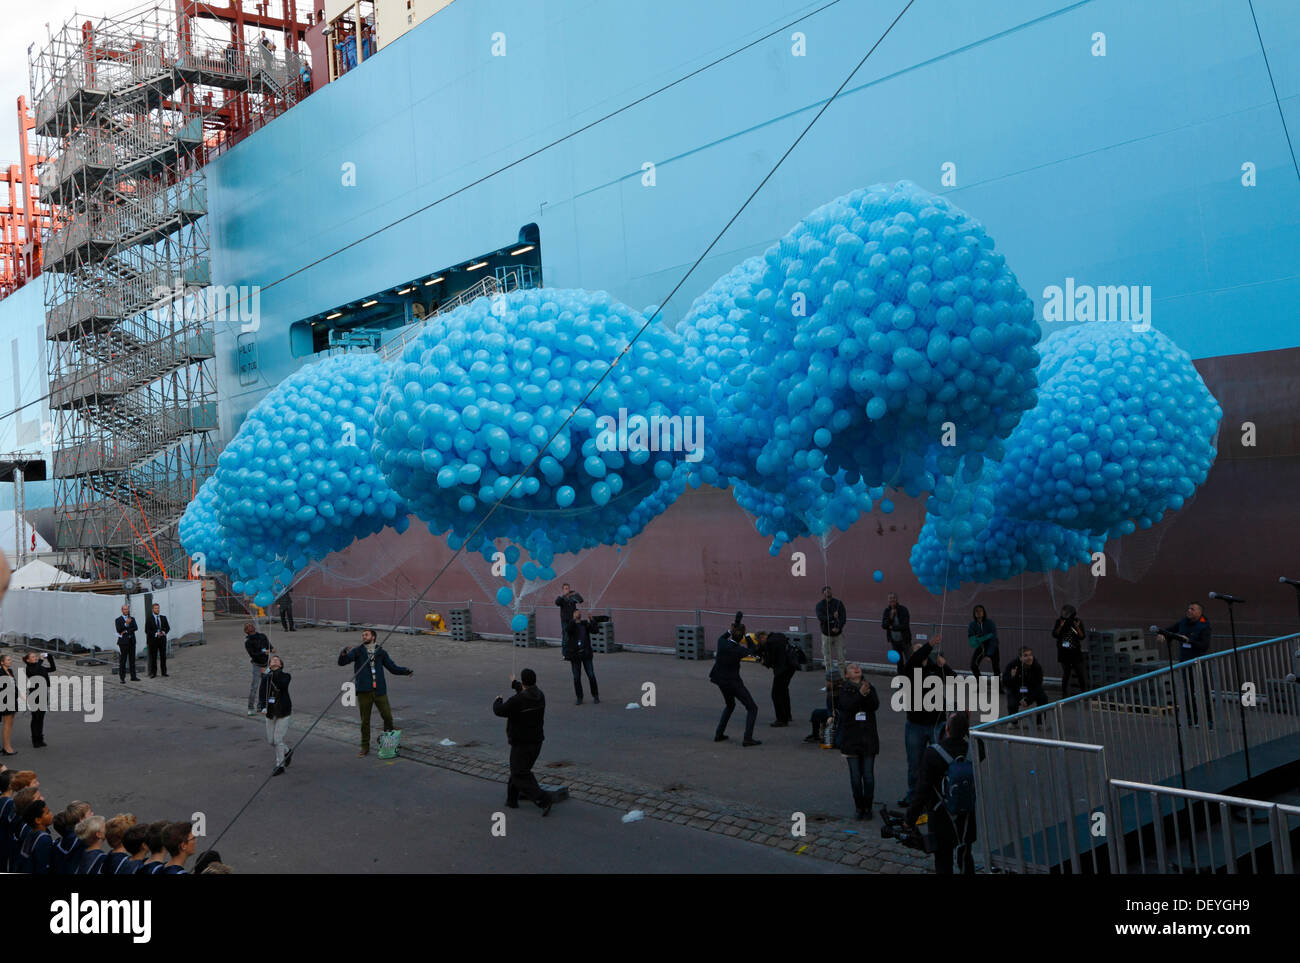 Copenhagen, September 25th, 2013. Today HRH Crown Princess Mary of Denmark officially named the triple-E container ship Majestic Maersk at Langelinie in the port of Copenhagen. The ceremony also marked the opening of the exhibition area and visits on board the ship to the public.  Numerous clusters of balloons in the well-known Maersk blue colour are released to celebrate the naming of the ship. Credit:  Niels Quist/Alamy Live News Stock Photo